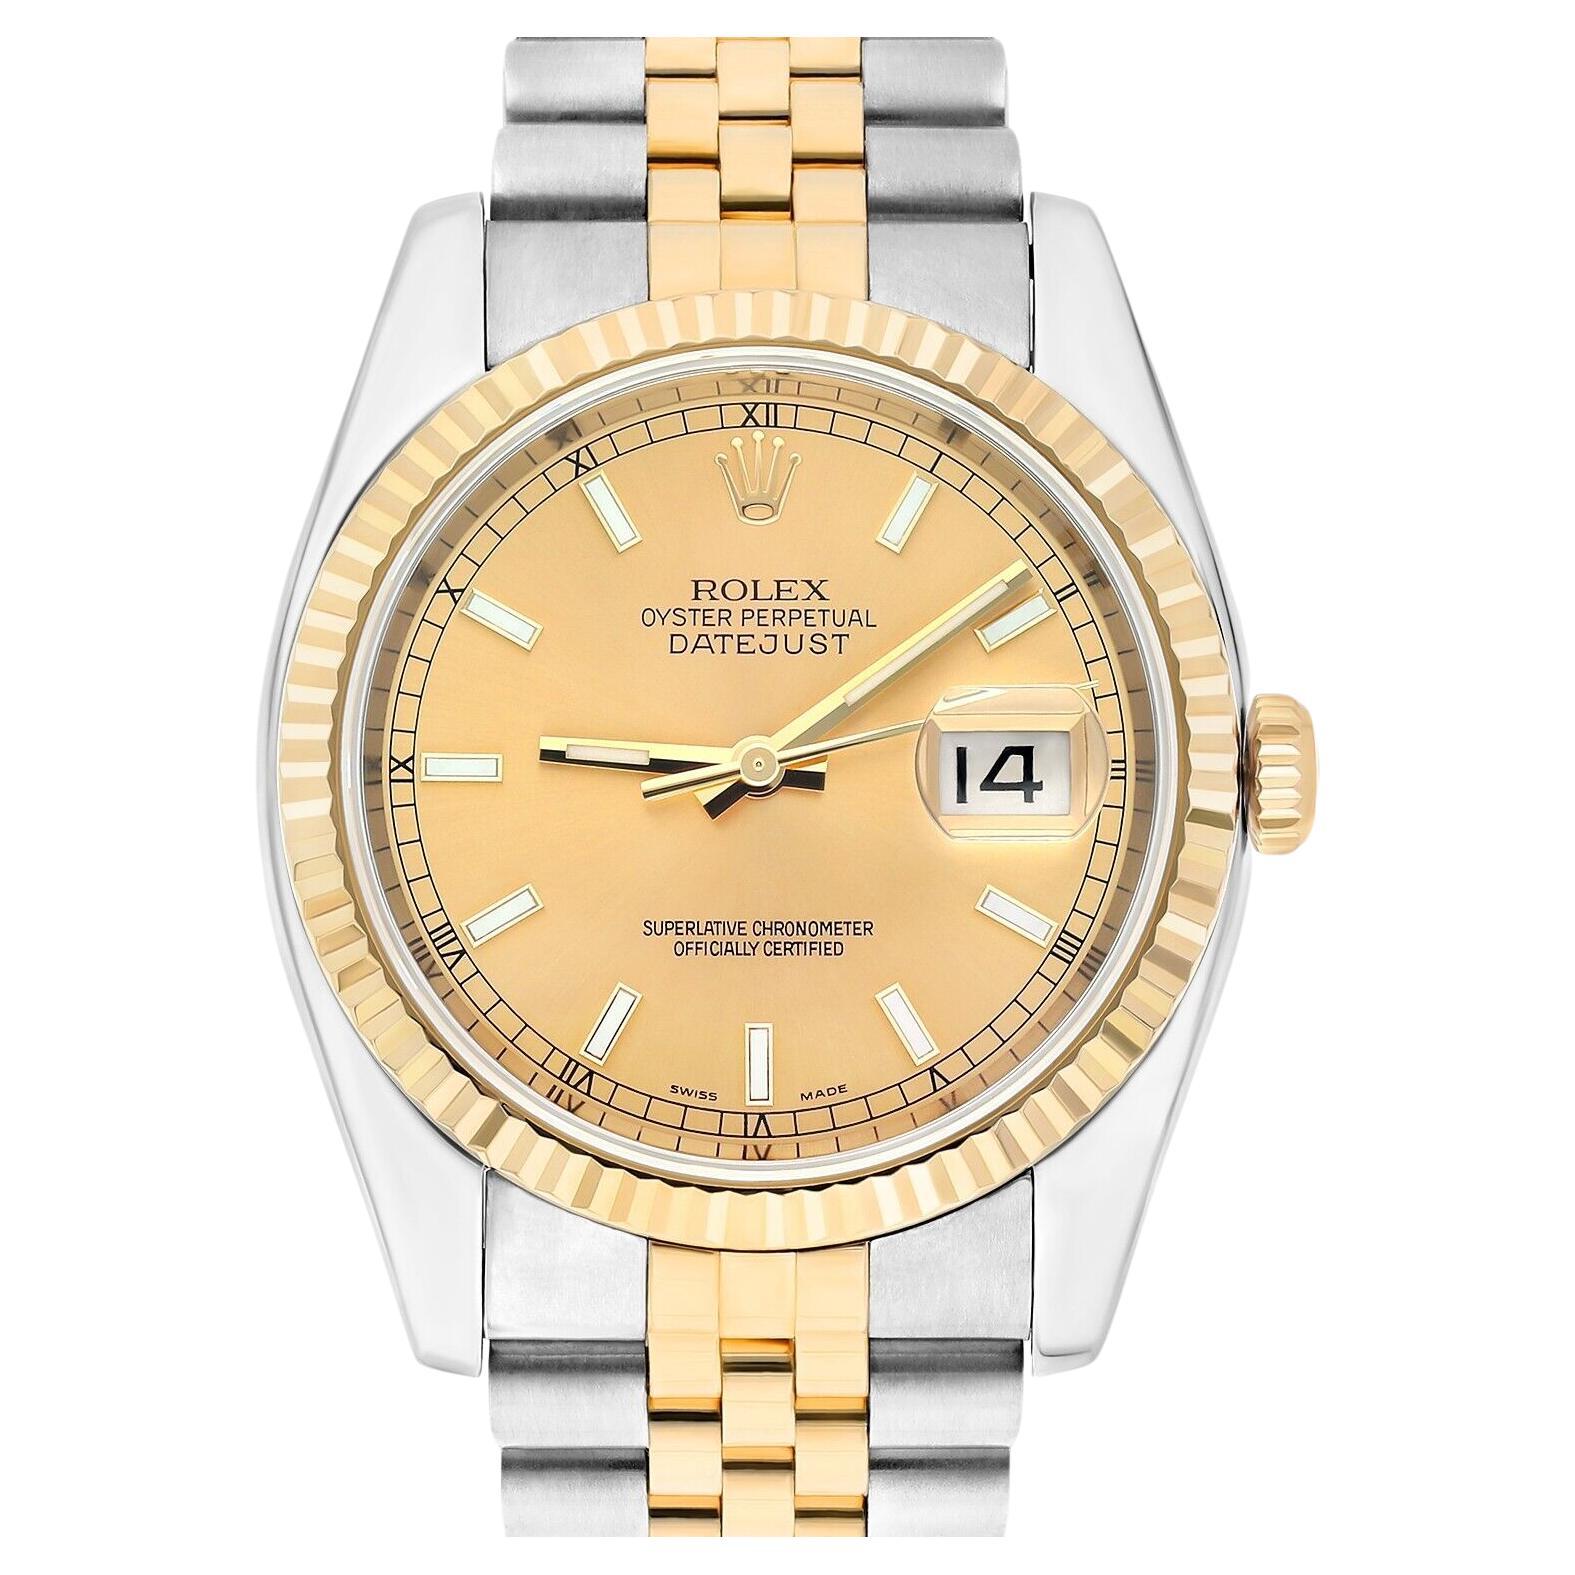 Rolex Datejust 36 Gold & Steel 116233 Watch Champagne Index Dial Jubilee Watch For Sale